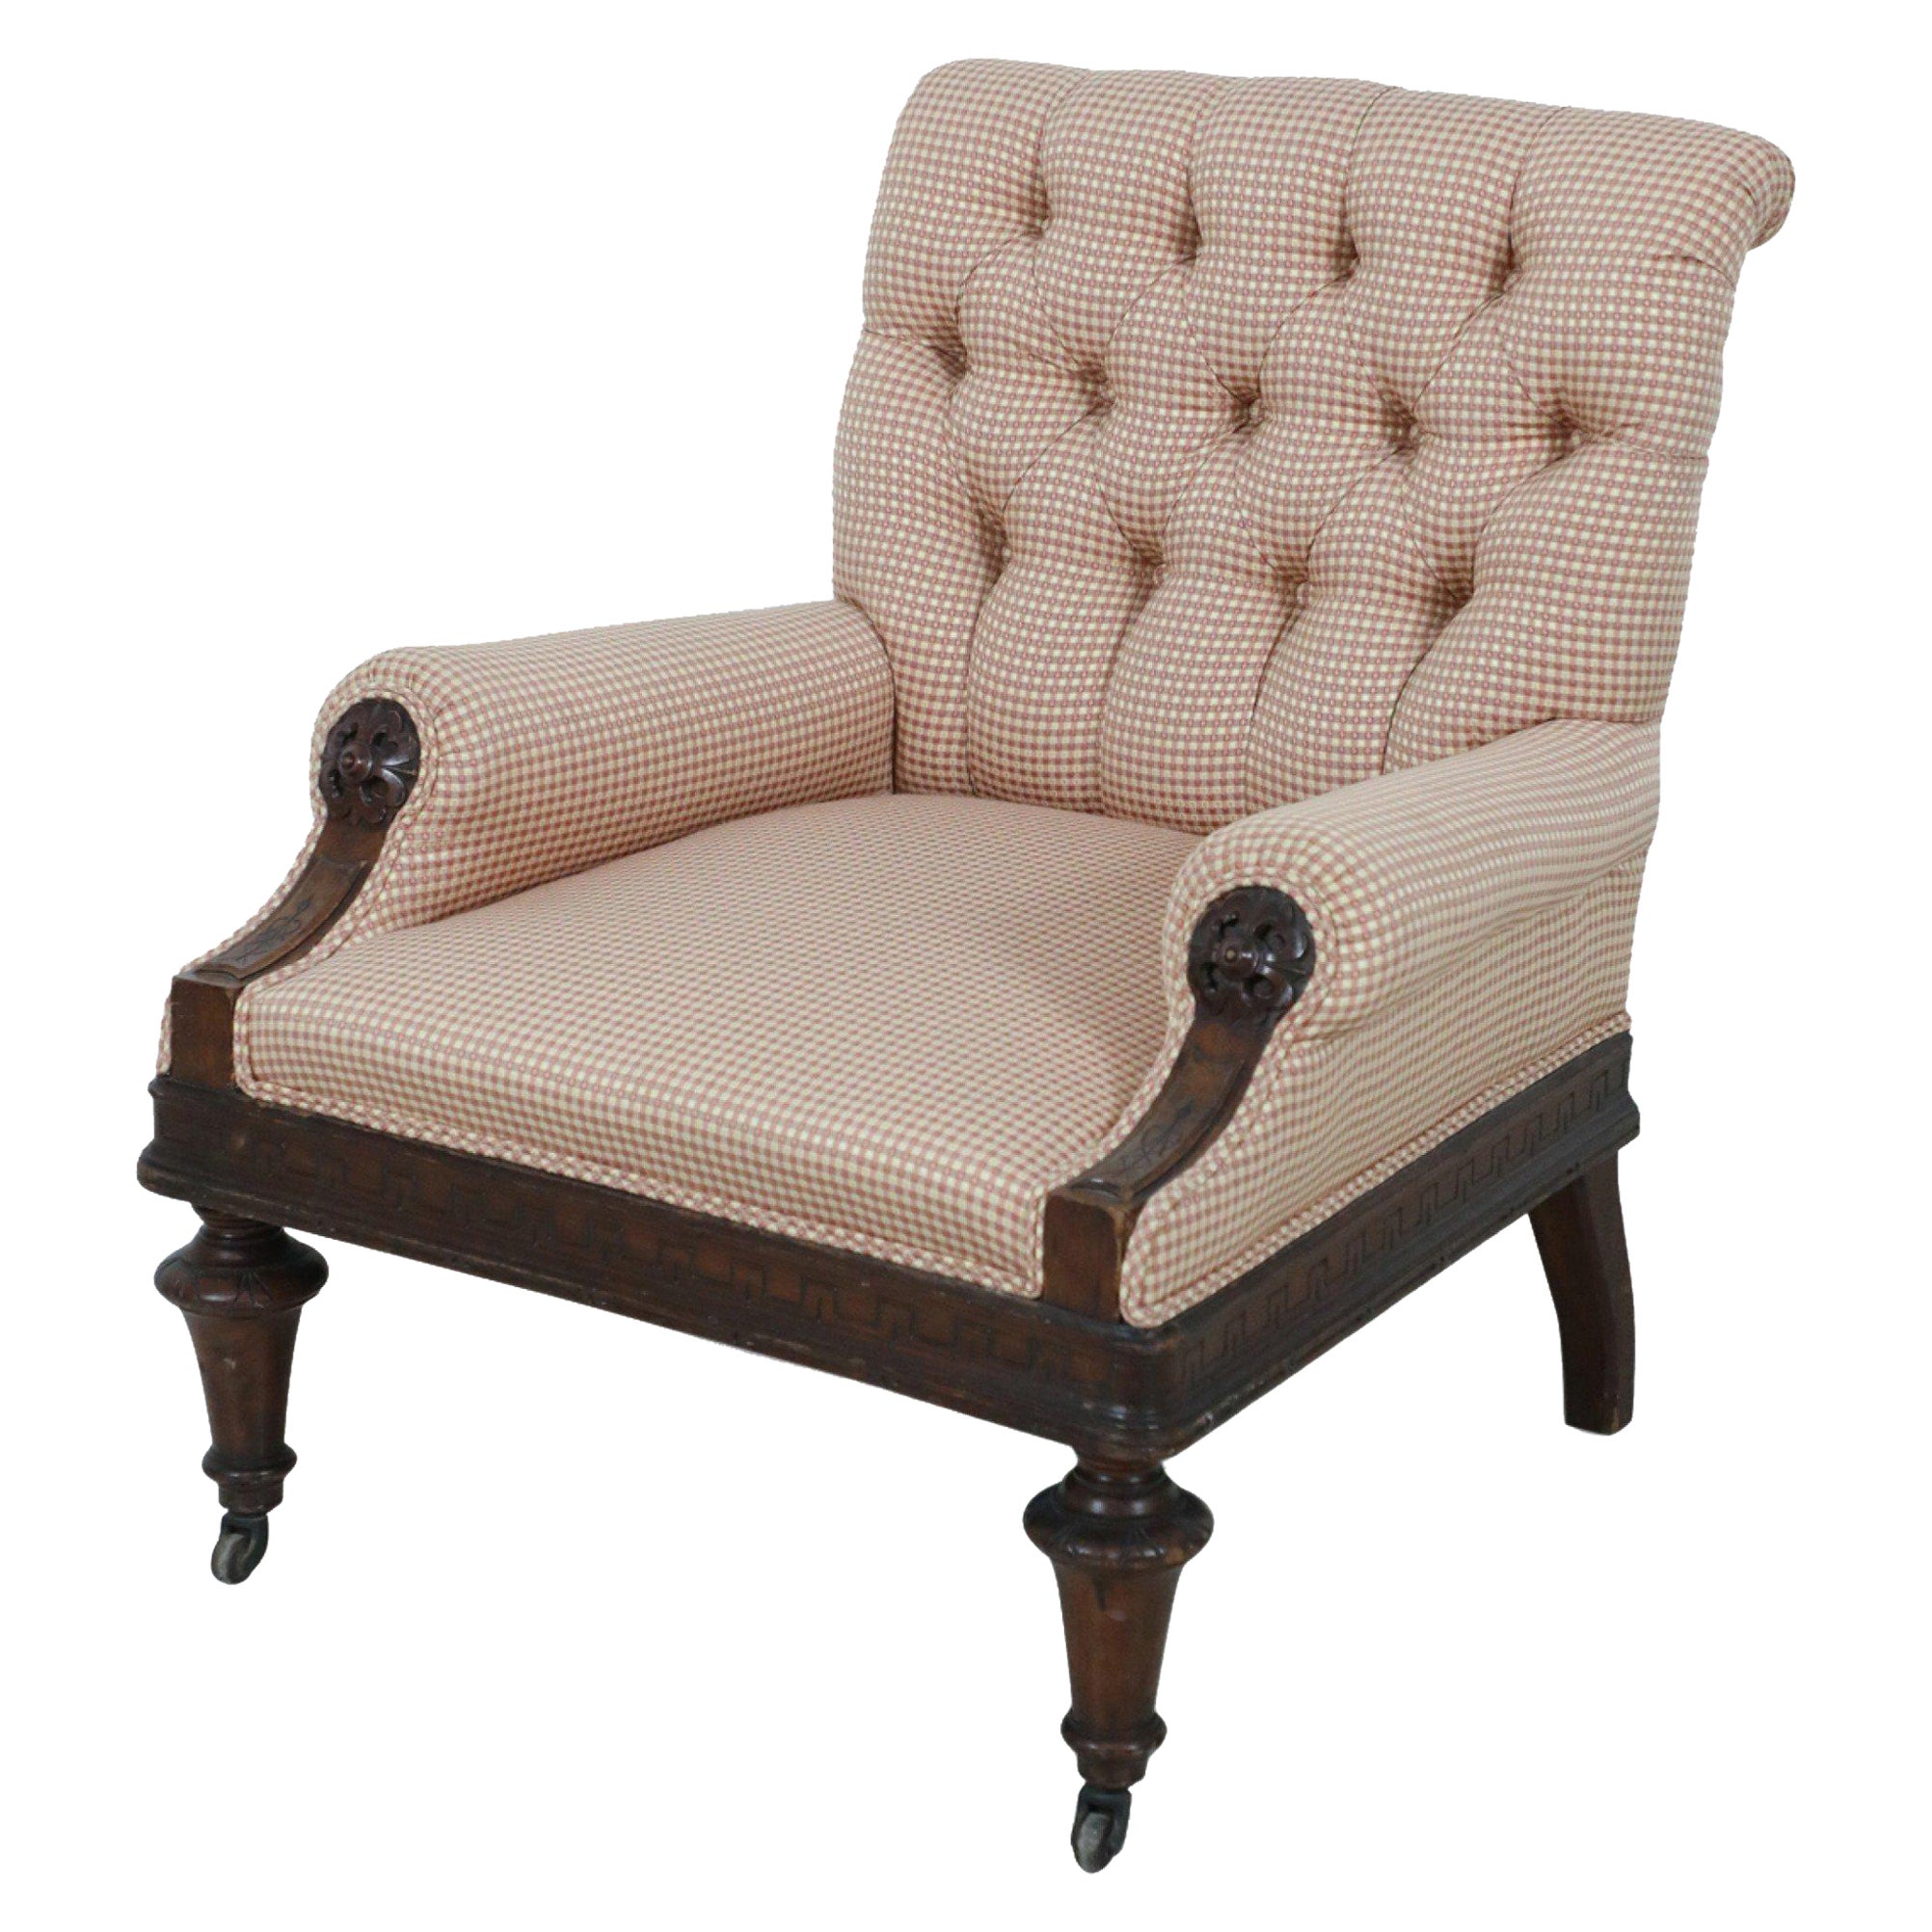 American Victorian Tufted Upholstered Red and Beige Checkered Mahogany Armchair For Sale